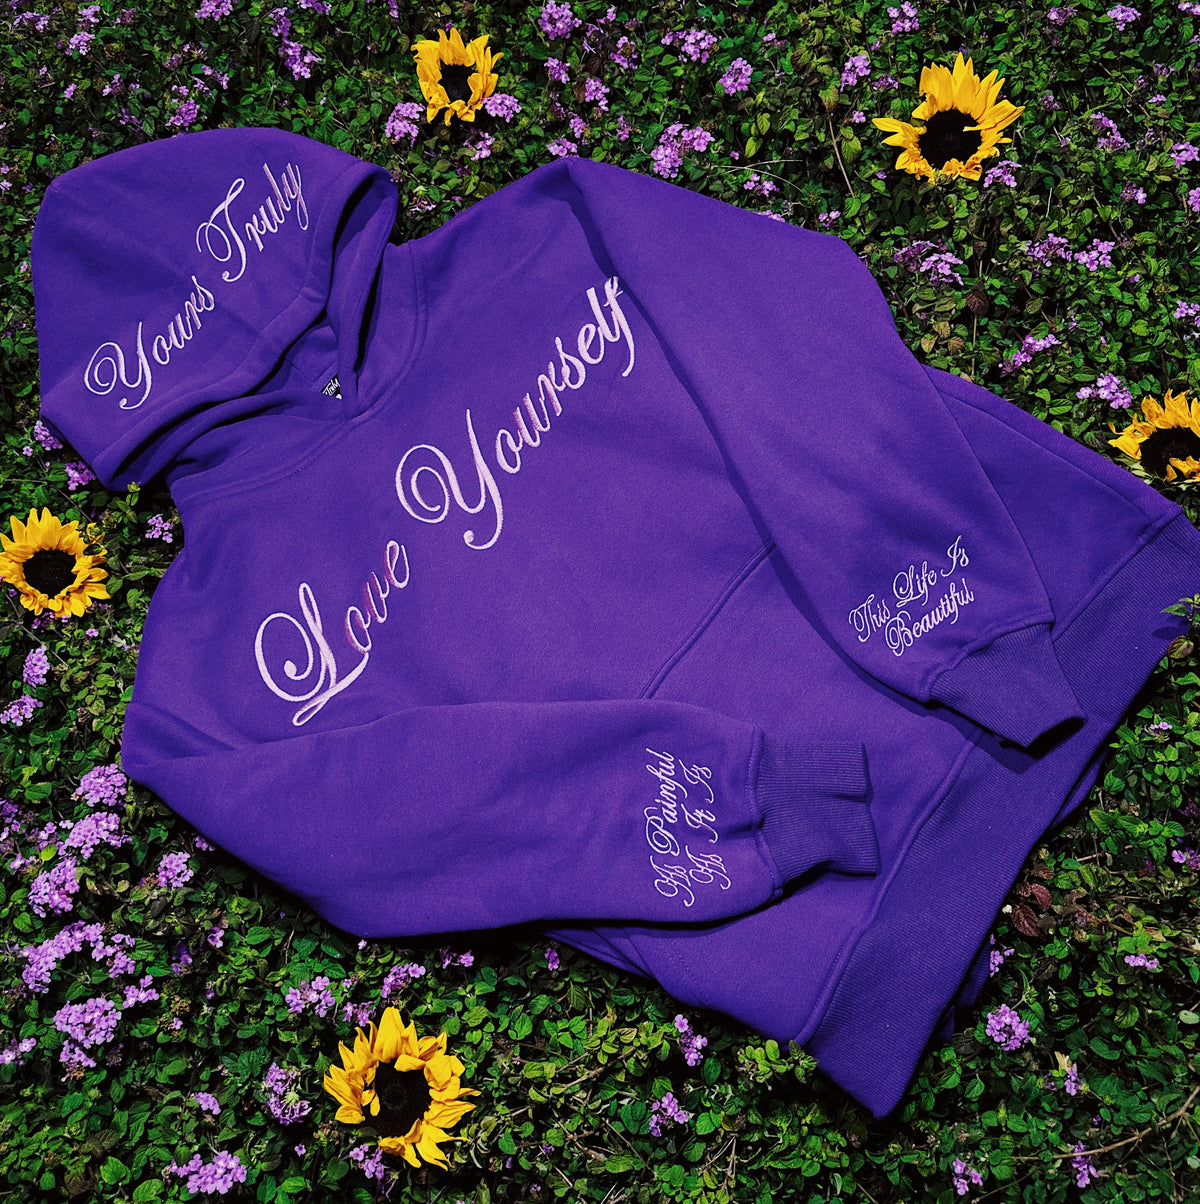 LOVE YOURSELF EMBROIDERED HOODIE - PURPLE